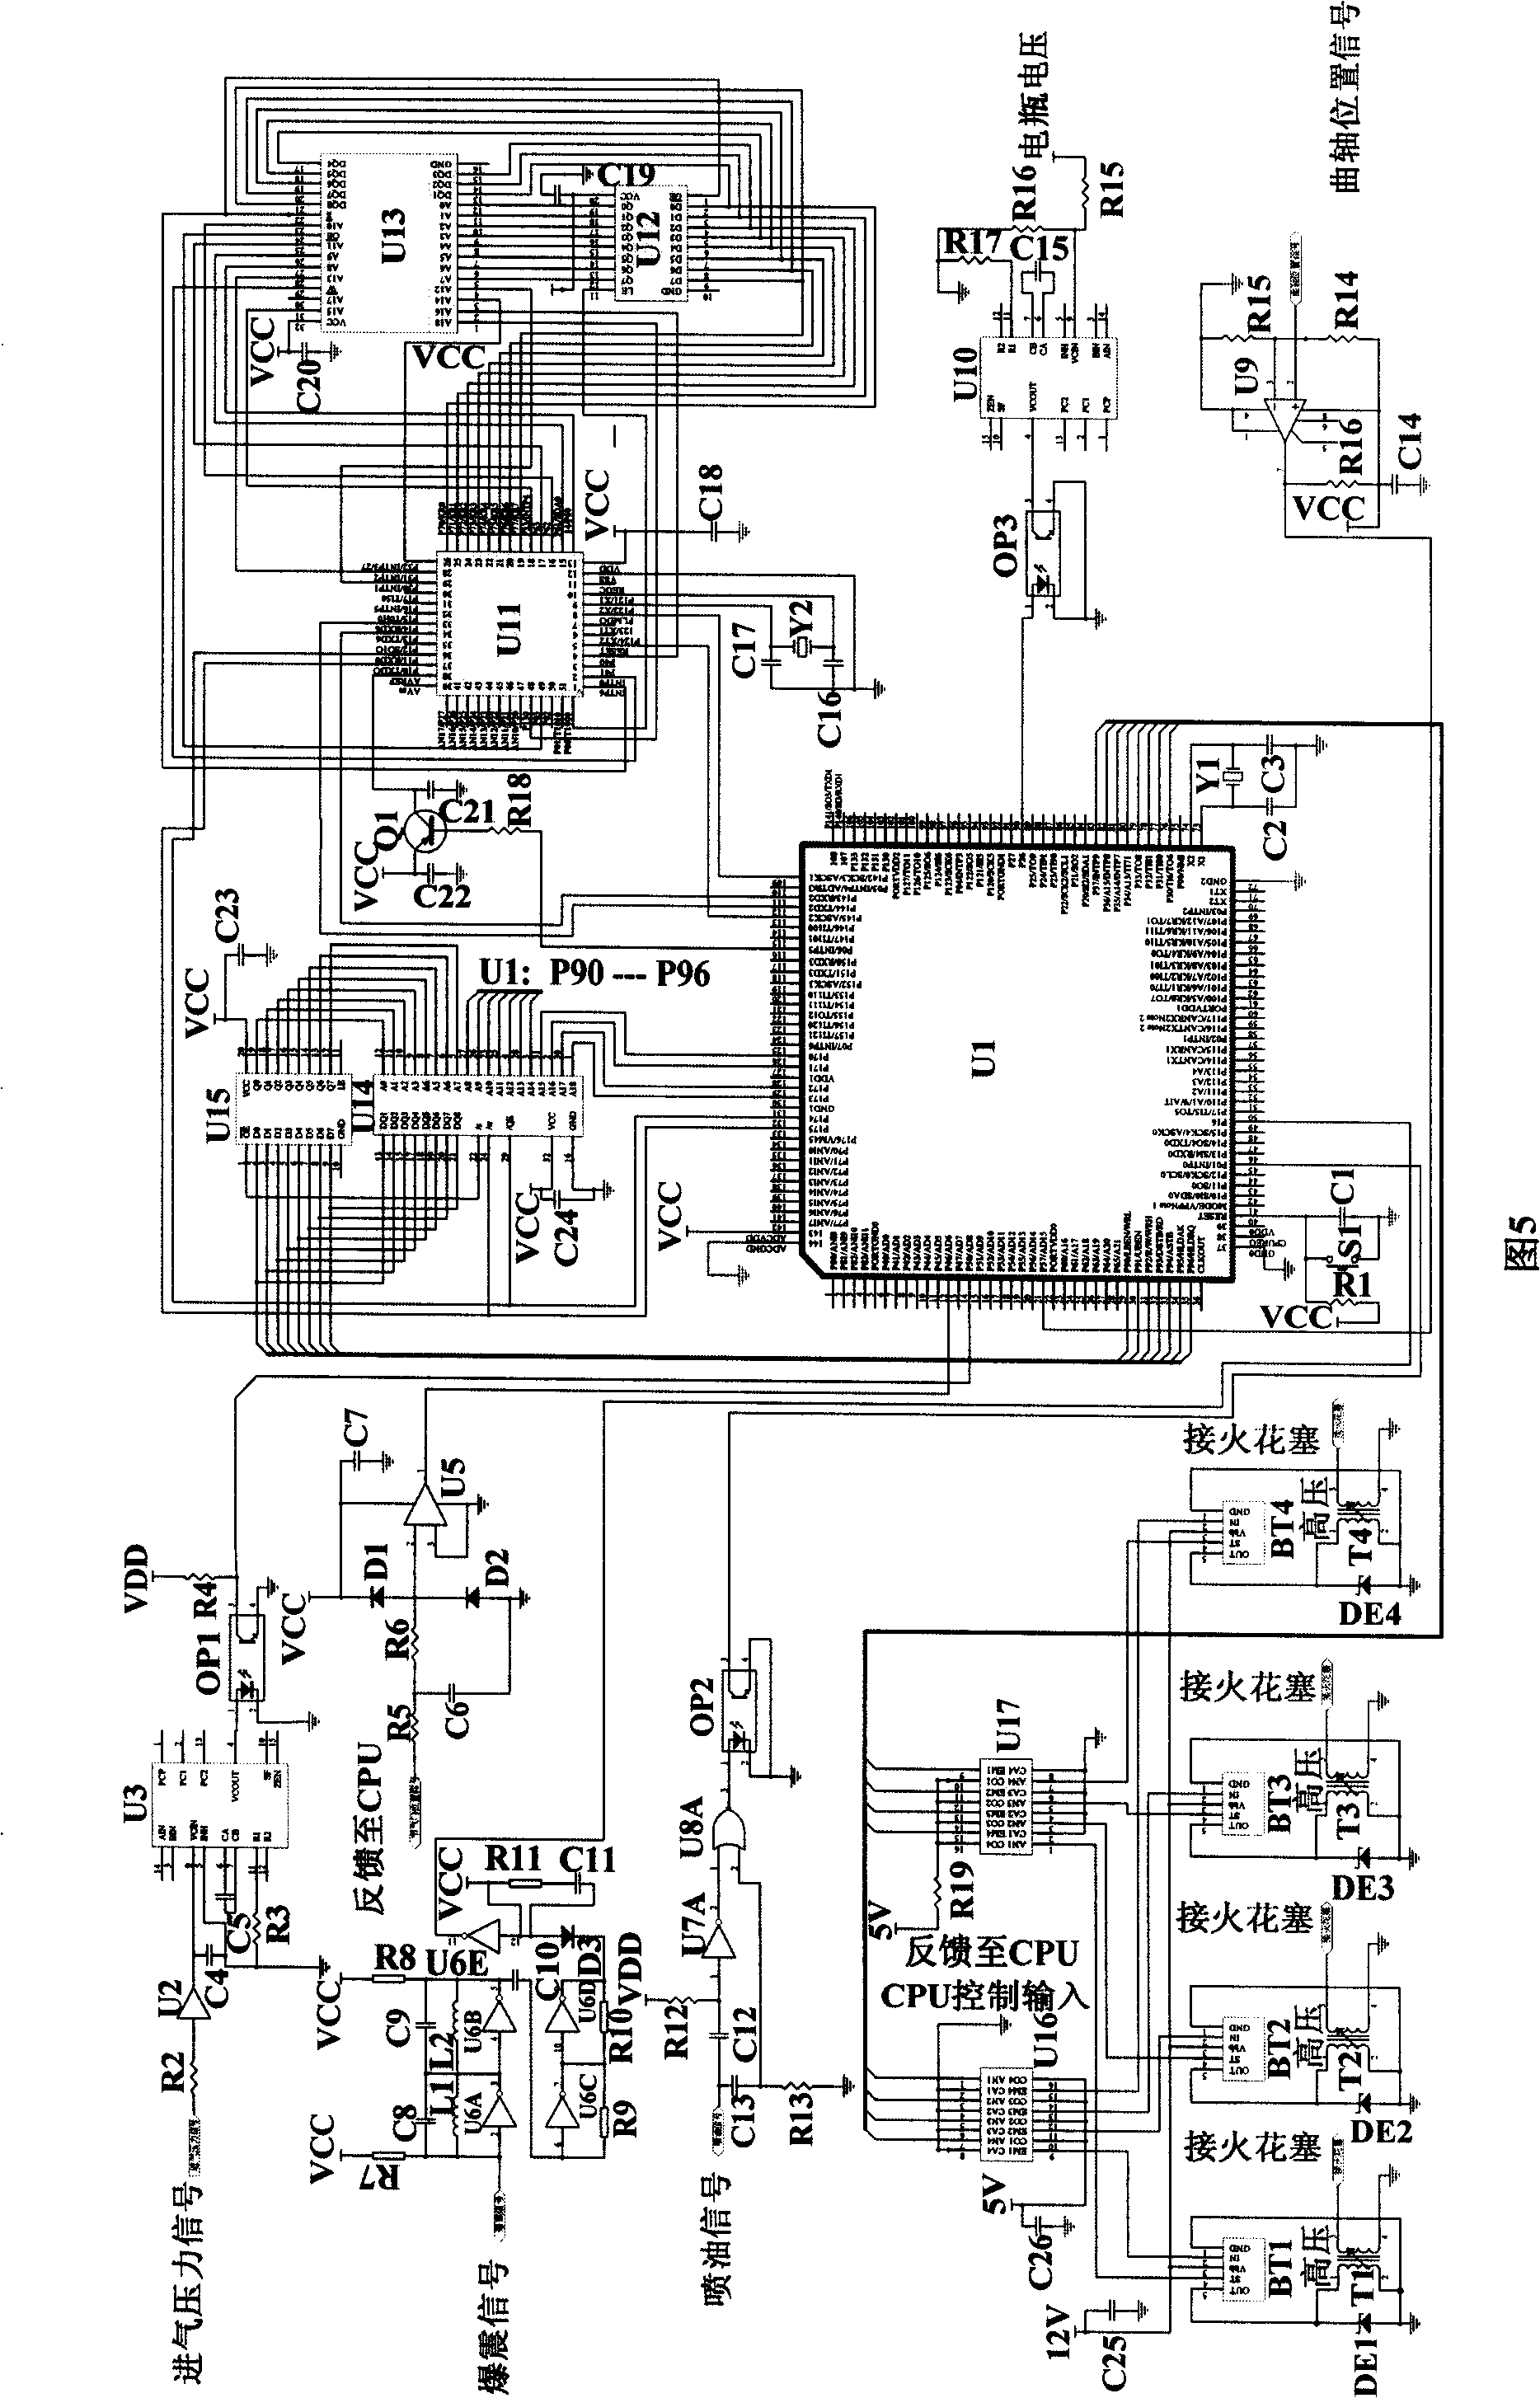 Method for combined pulse spectrum controlling engine ignition timing